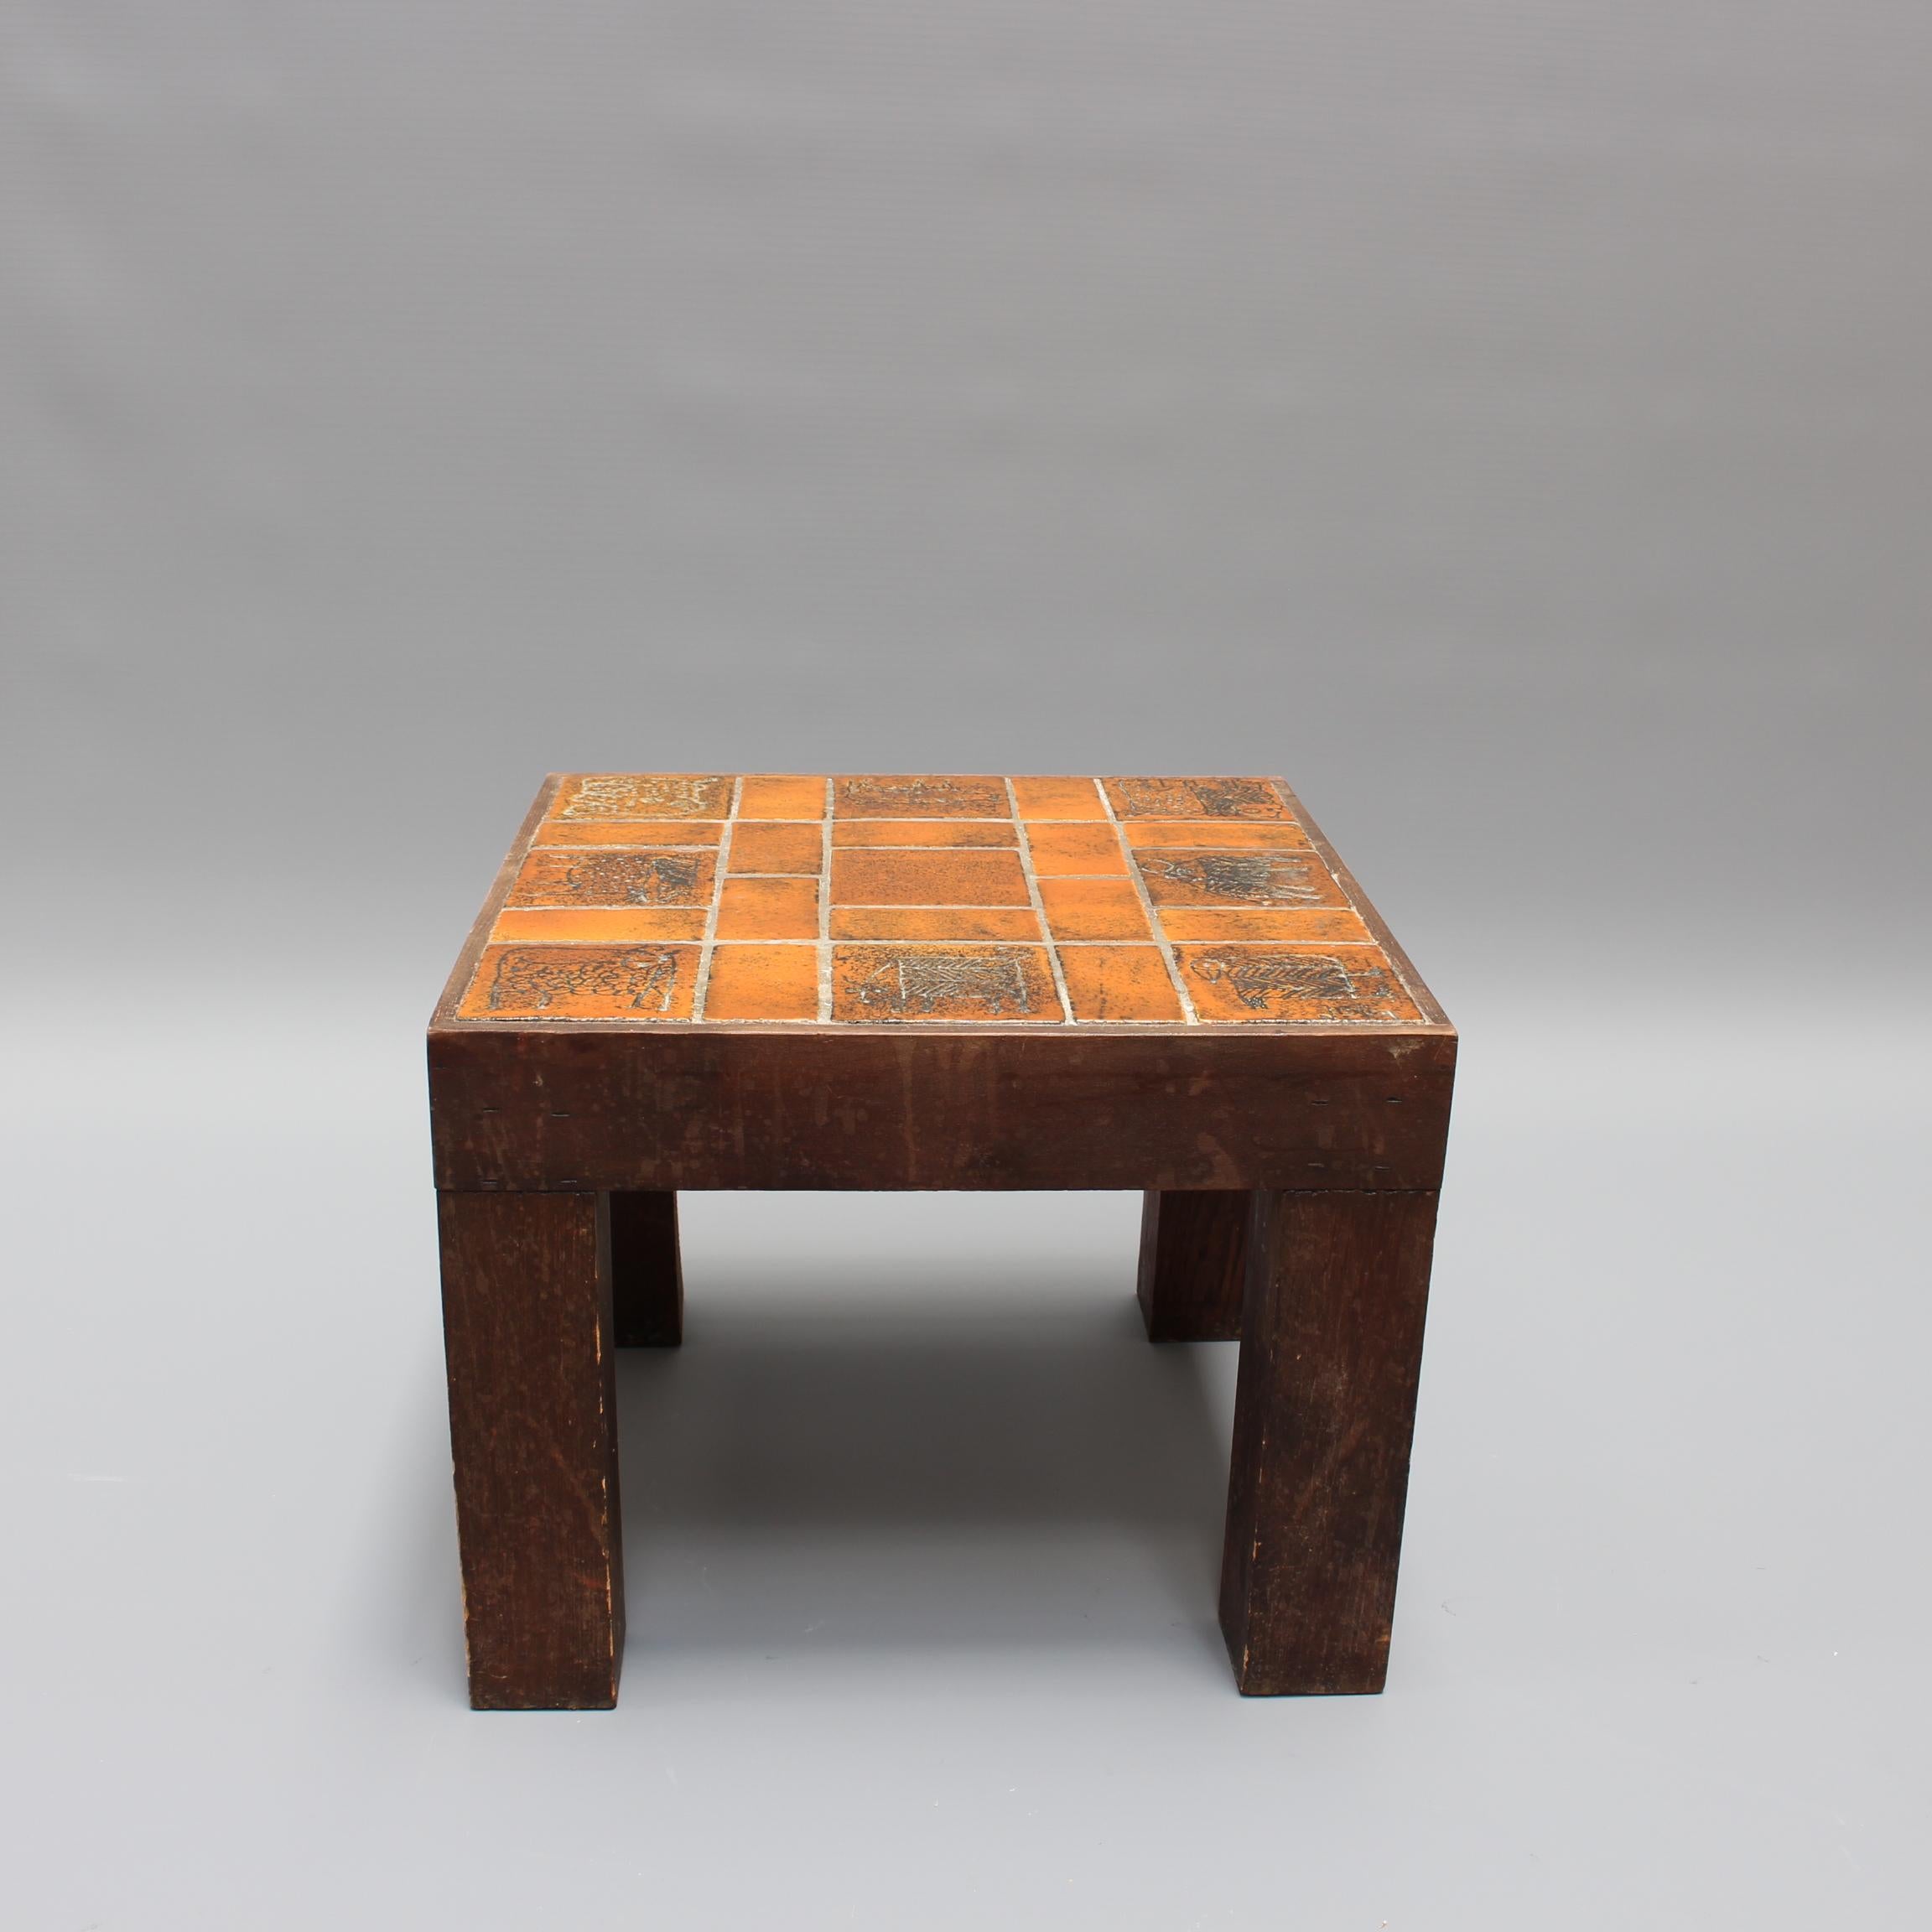 Mid-Century Modern Vintage French Square Side Table with Ceramic Tile Top by Jacques Blin, c. 1950s For Sale